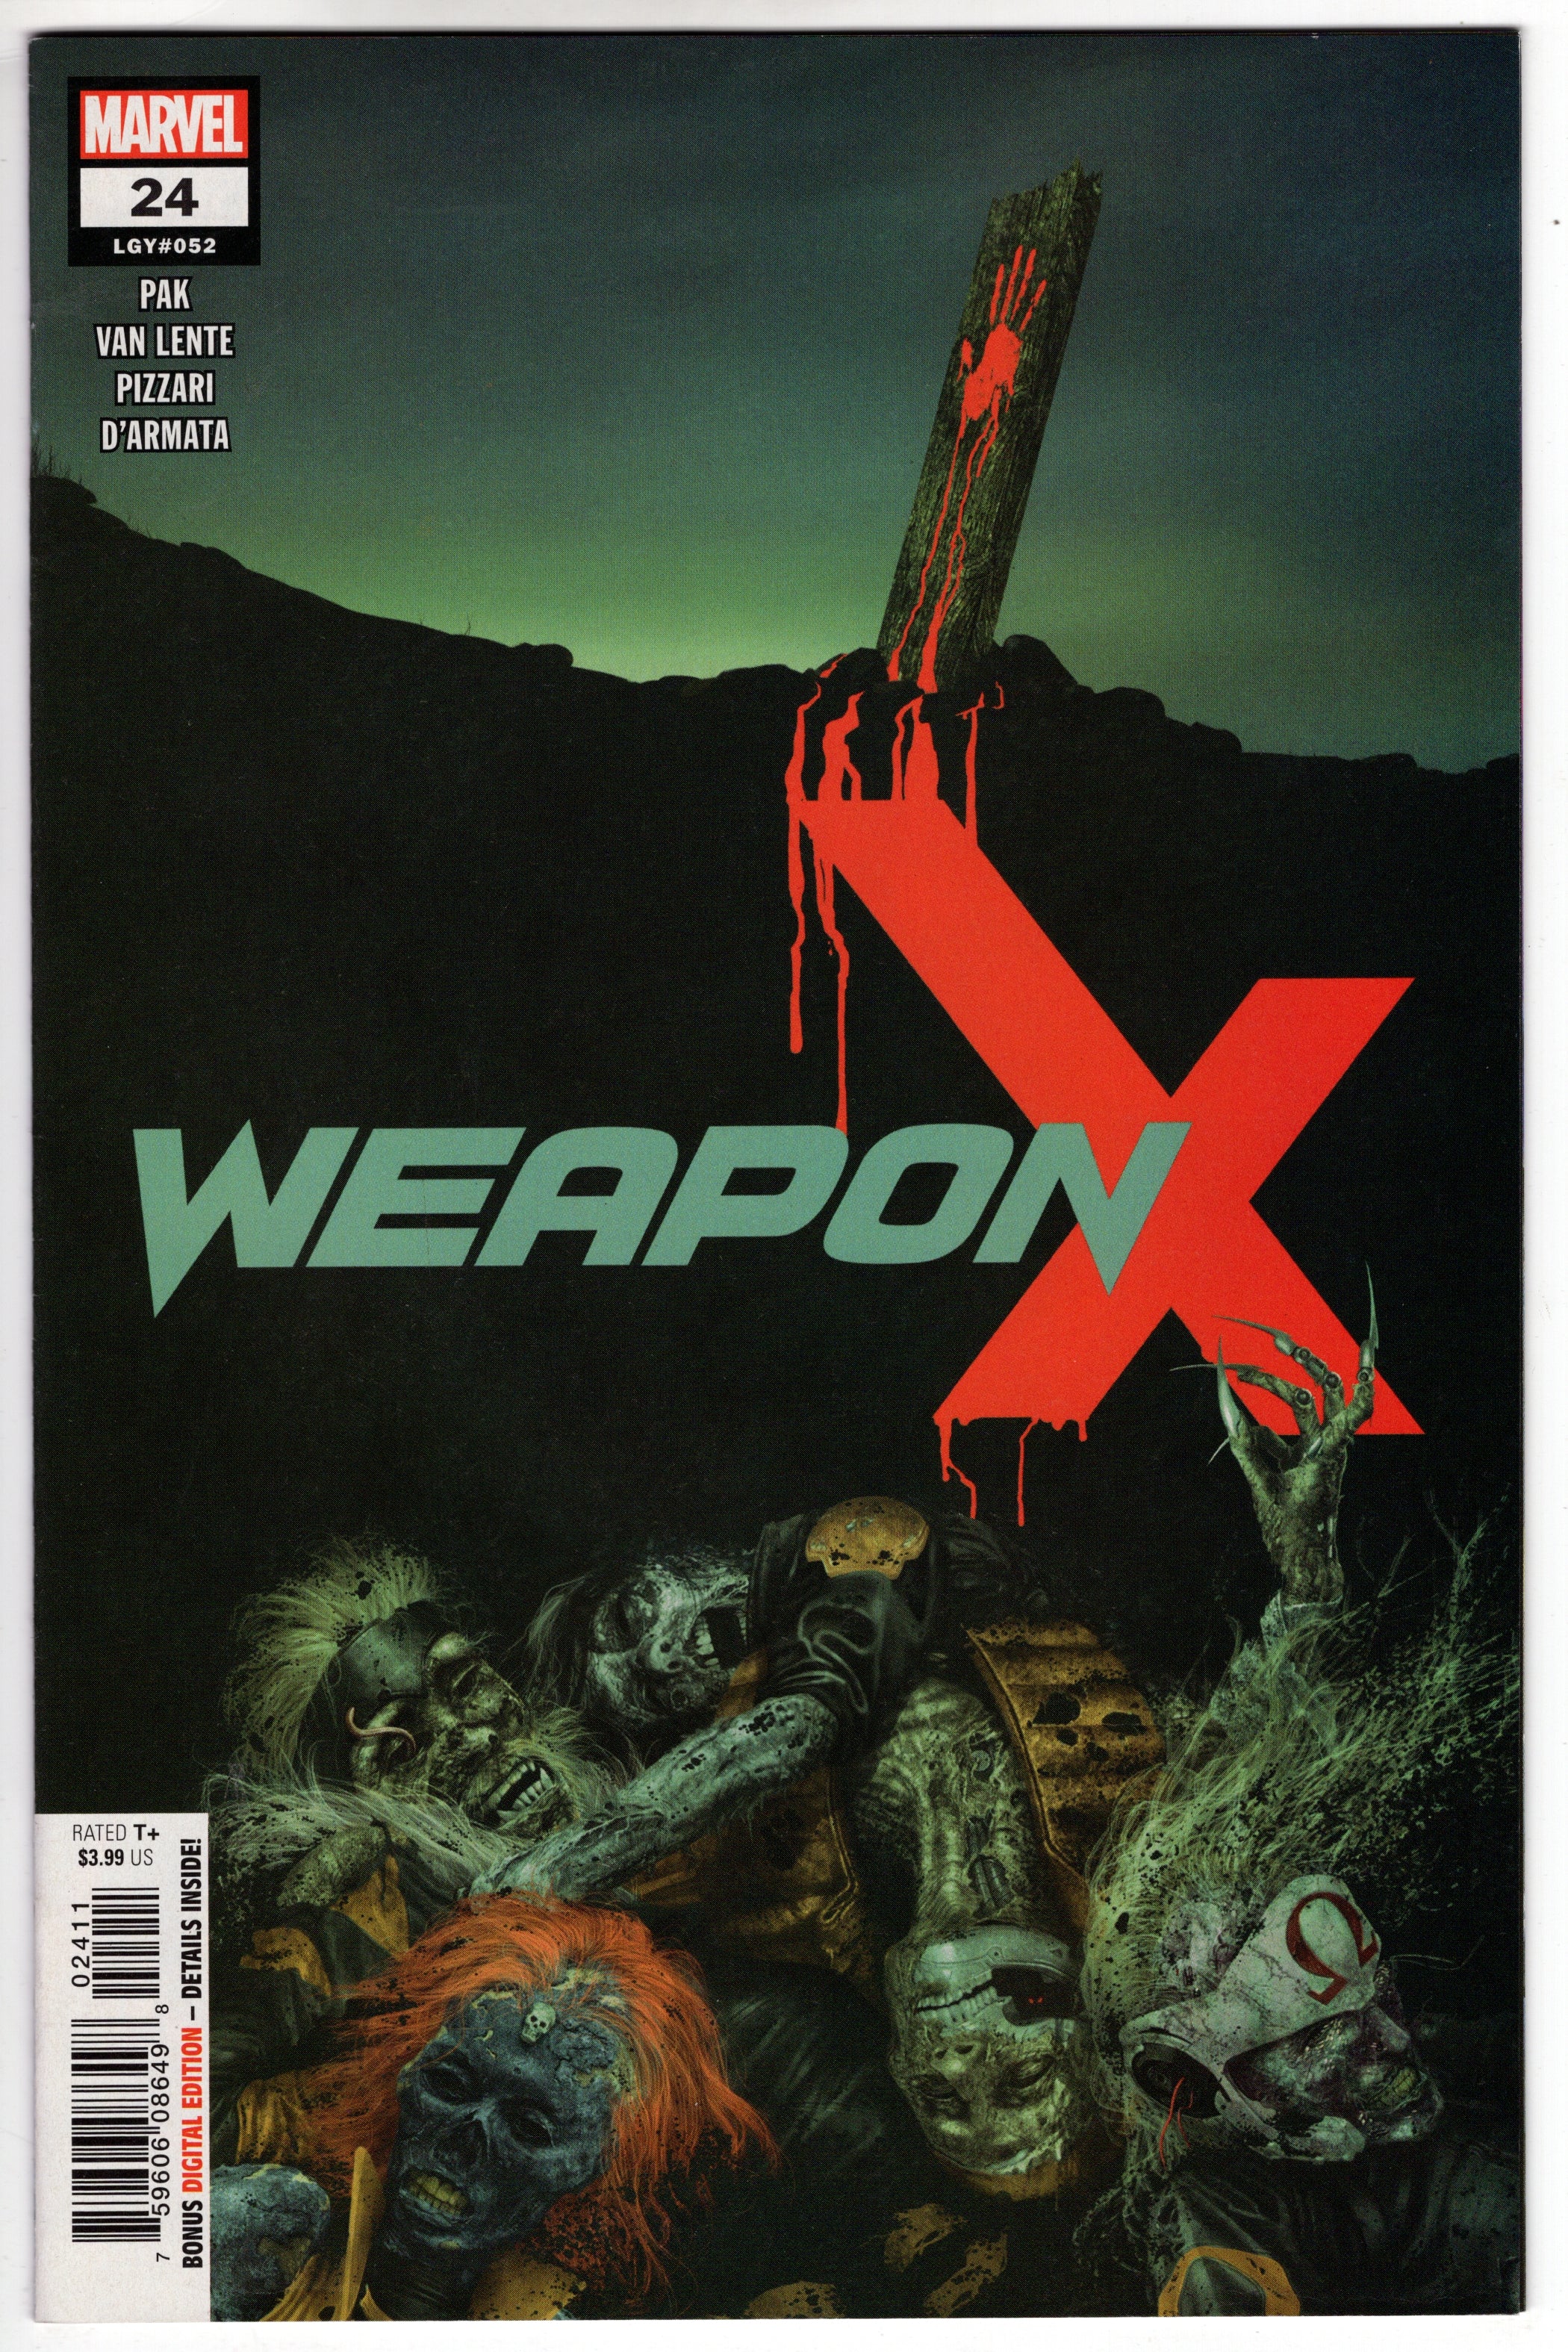 Weapon X Poster